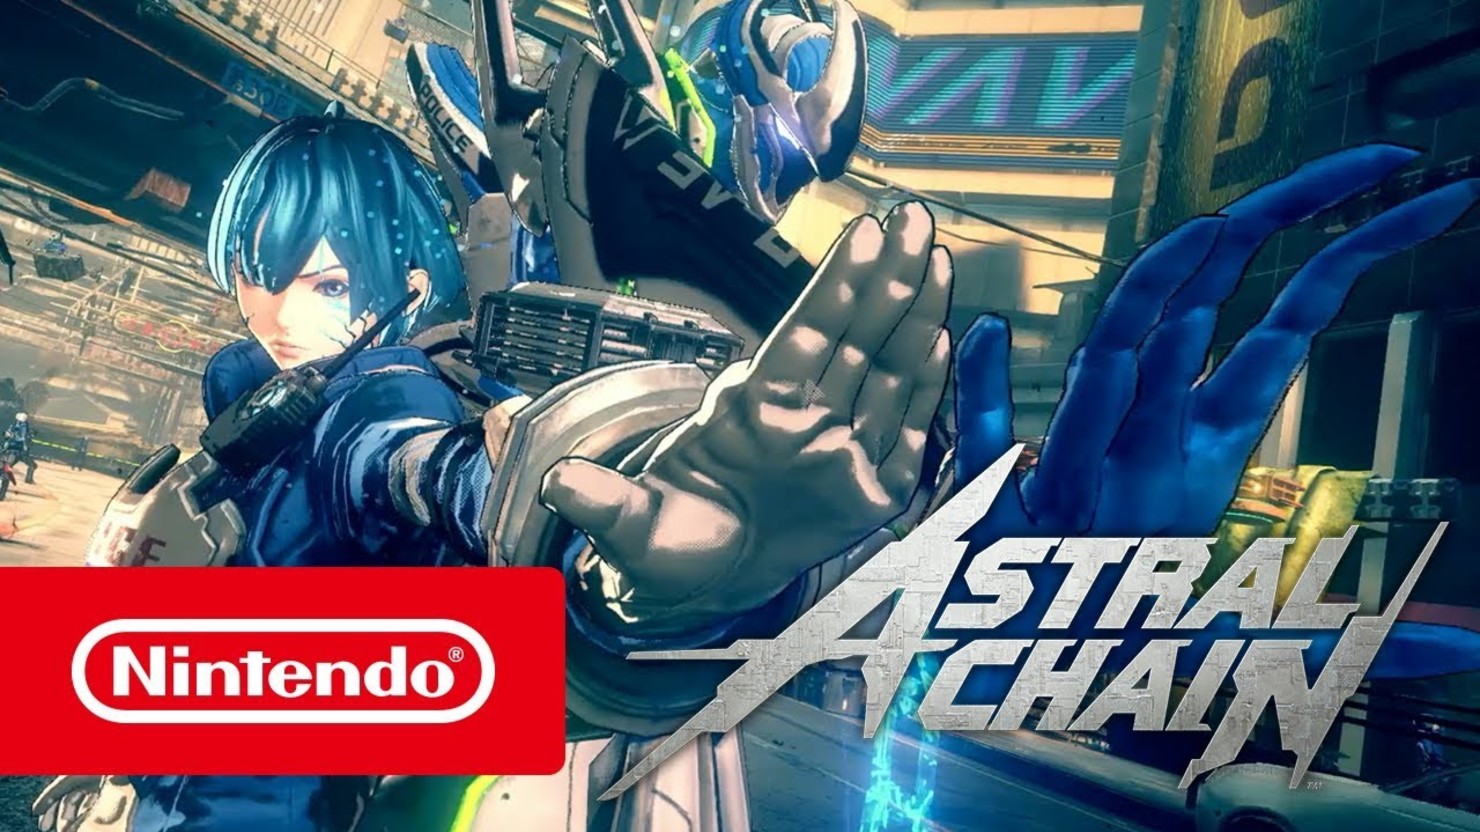 Astral Chain Nintendo Switch. Astral Chain Nintendo Switch Скриншоты. Astral Chain Nintendo обзор. Astral Chain геймплей. Astral chain nintendo